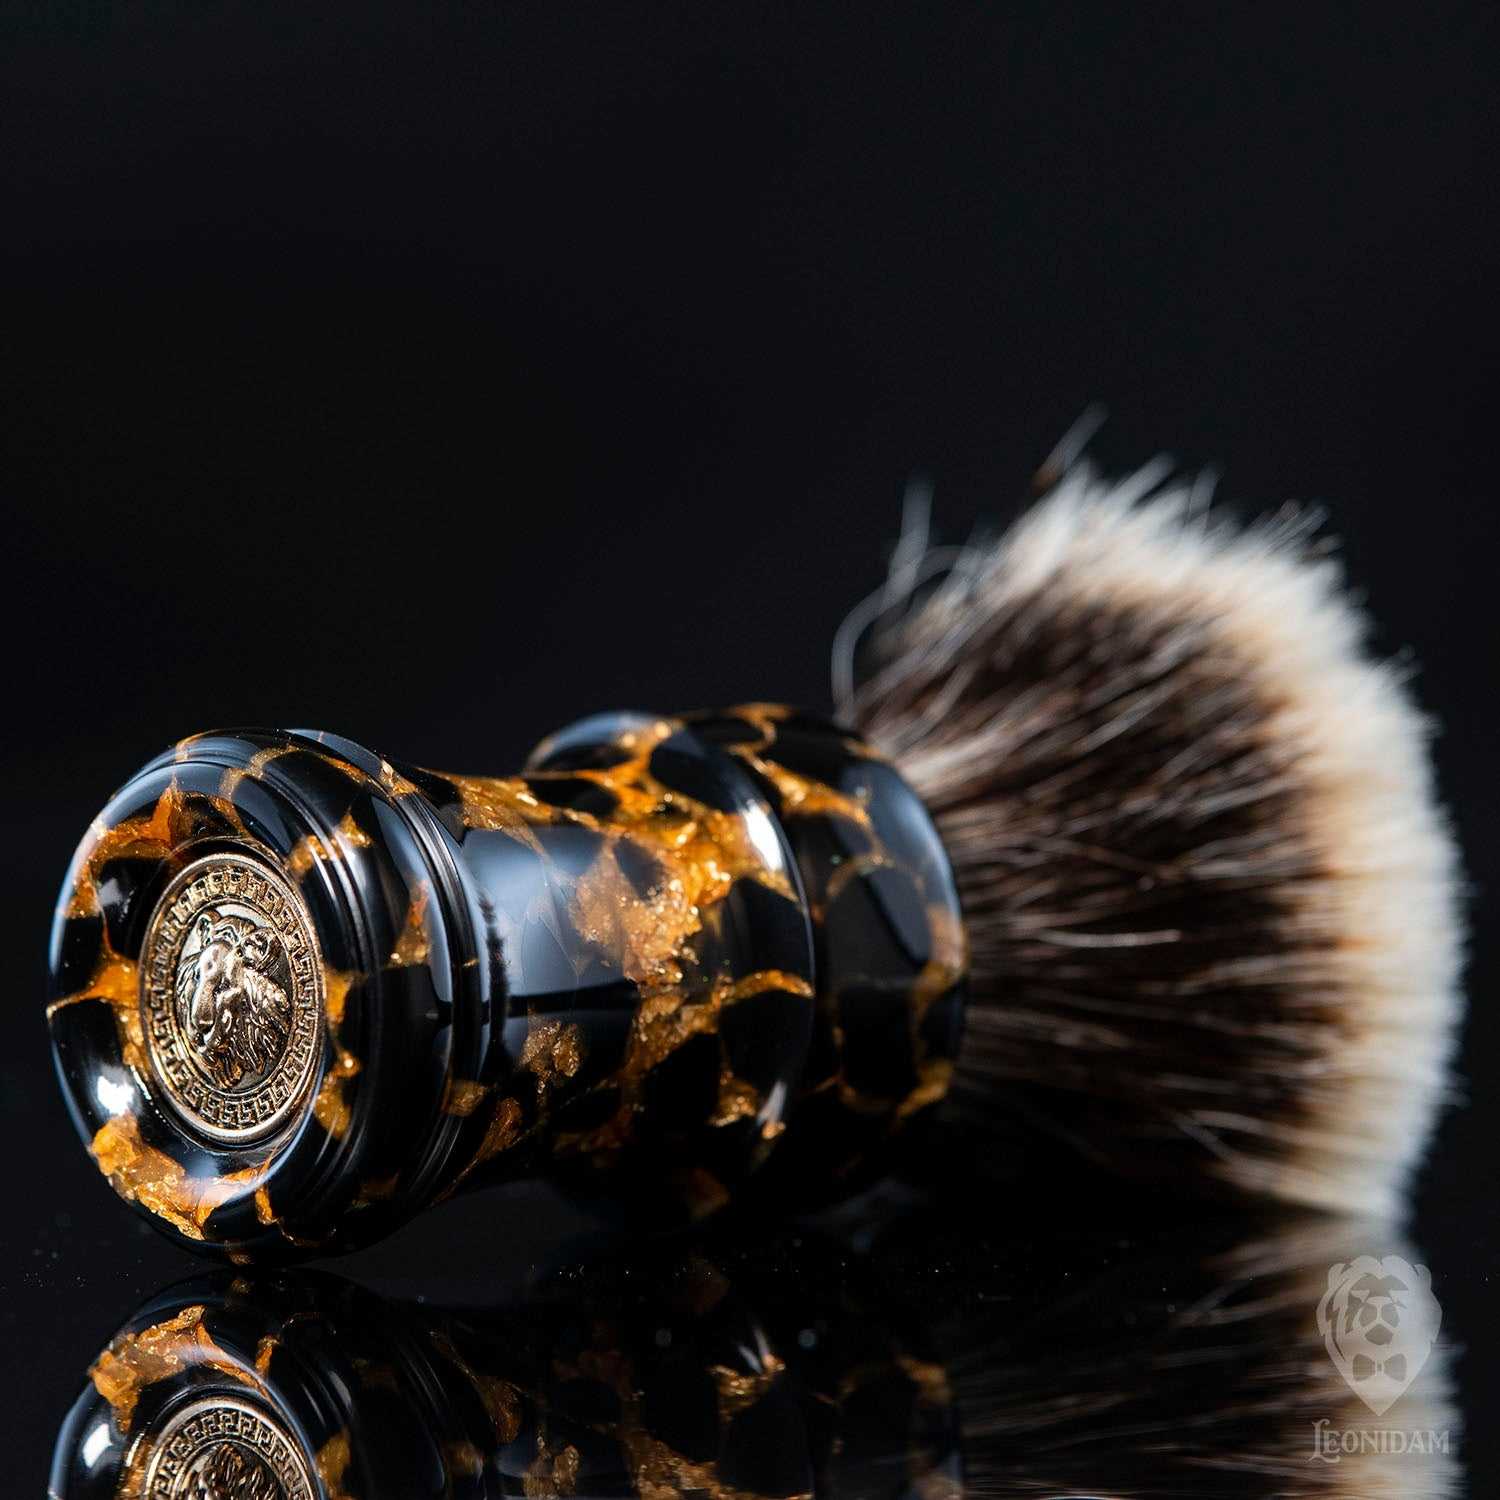 Handmade Shaving Brush "Anubis" in polished black and gold resin.